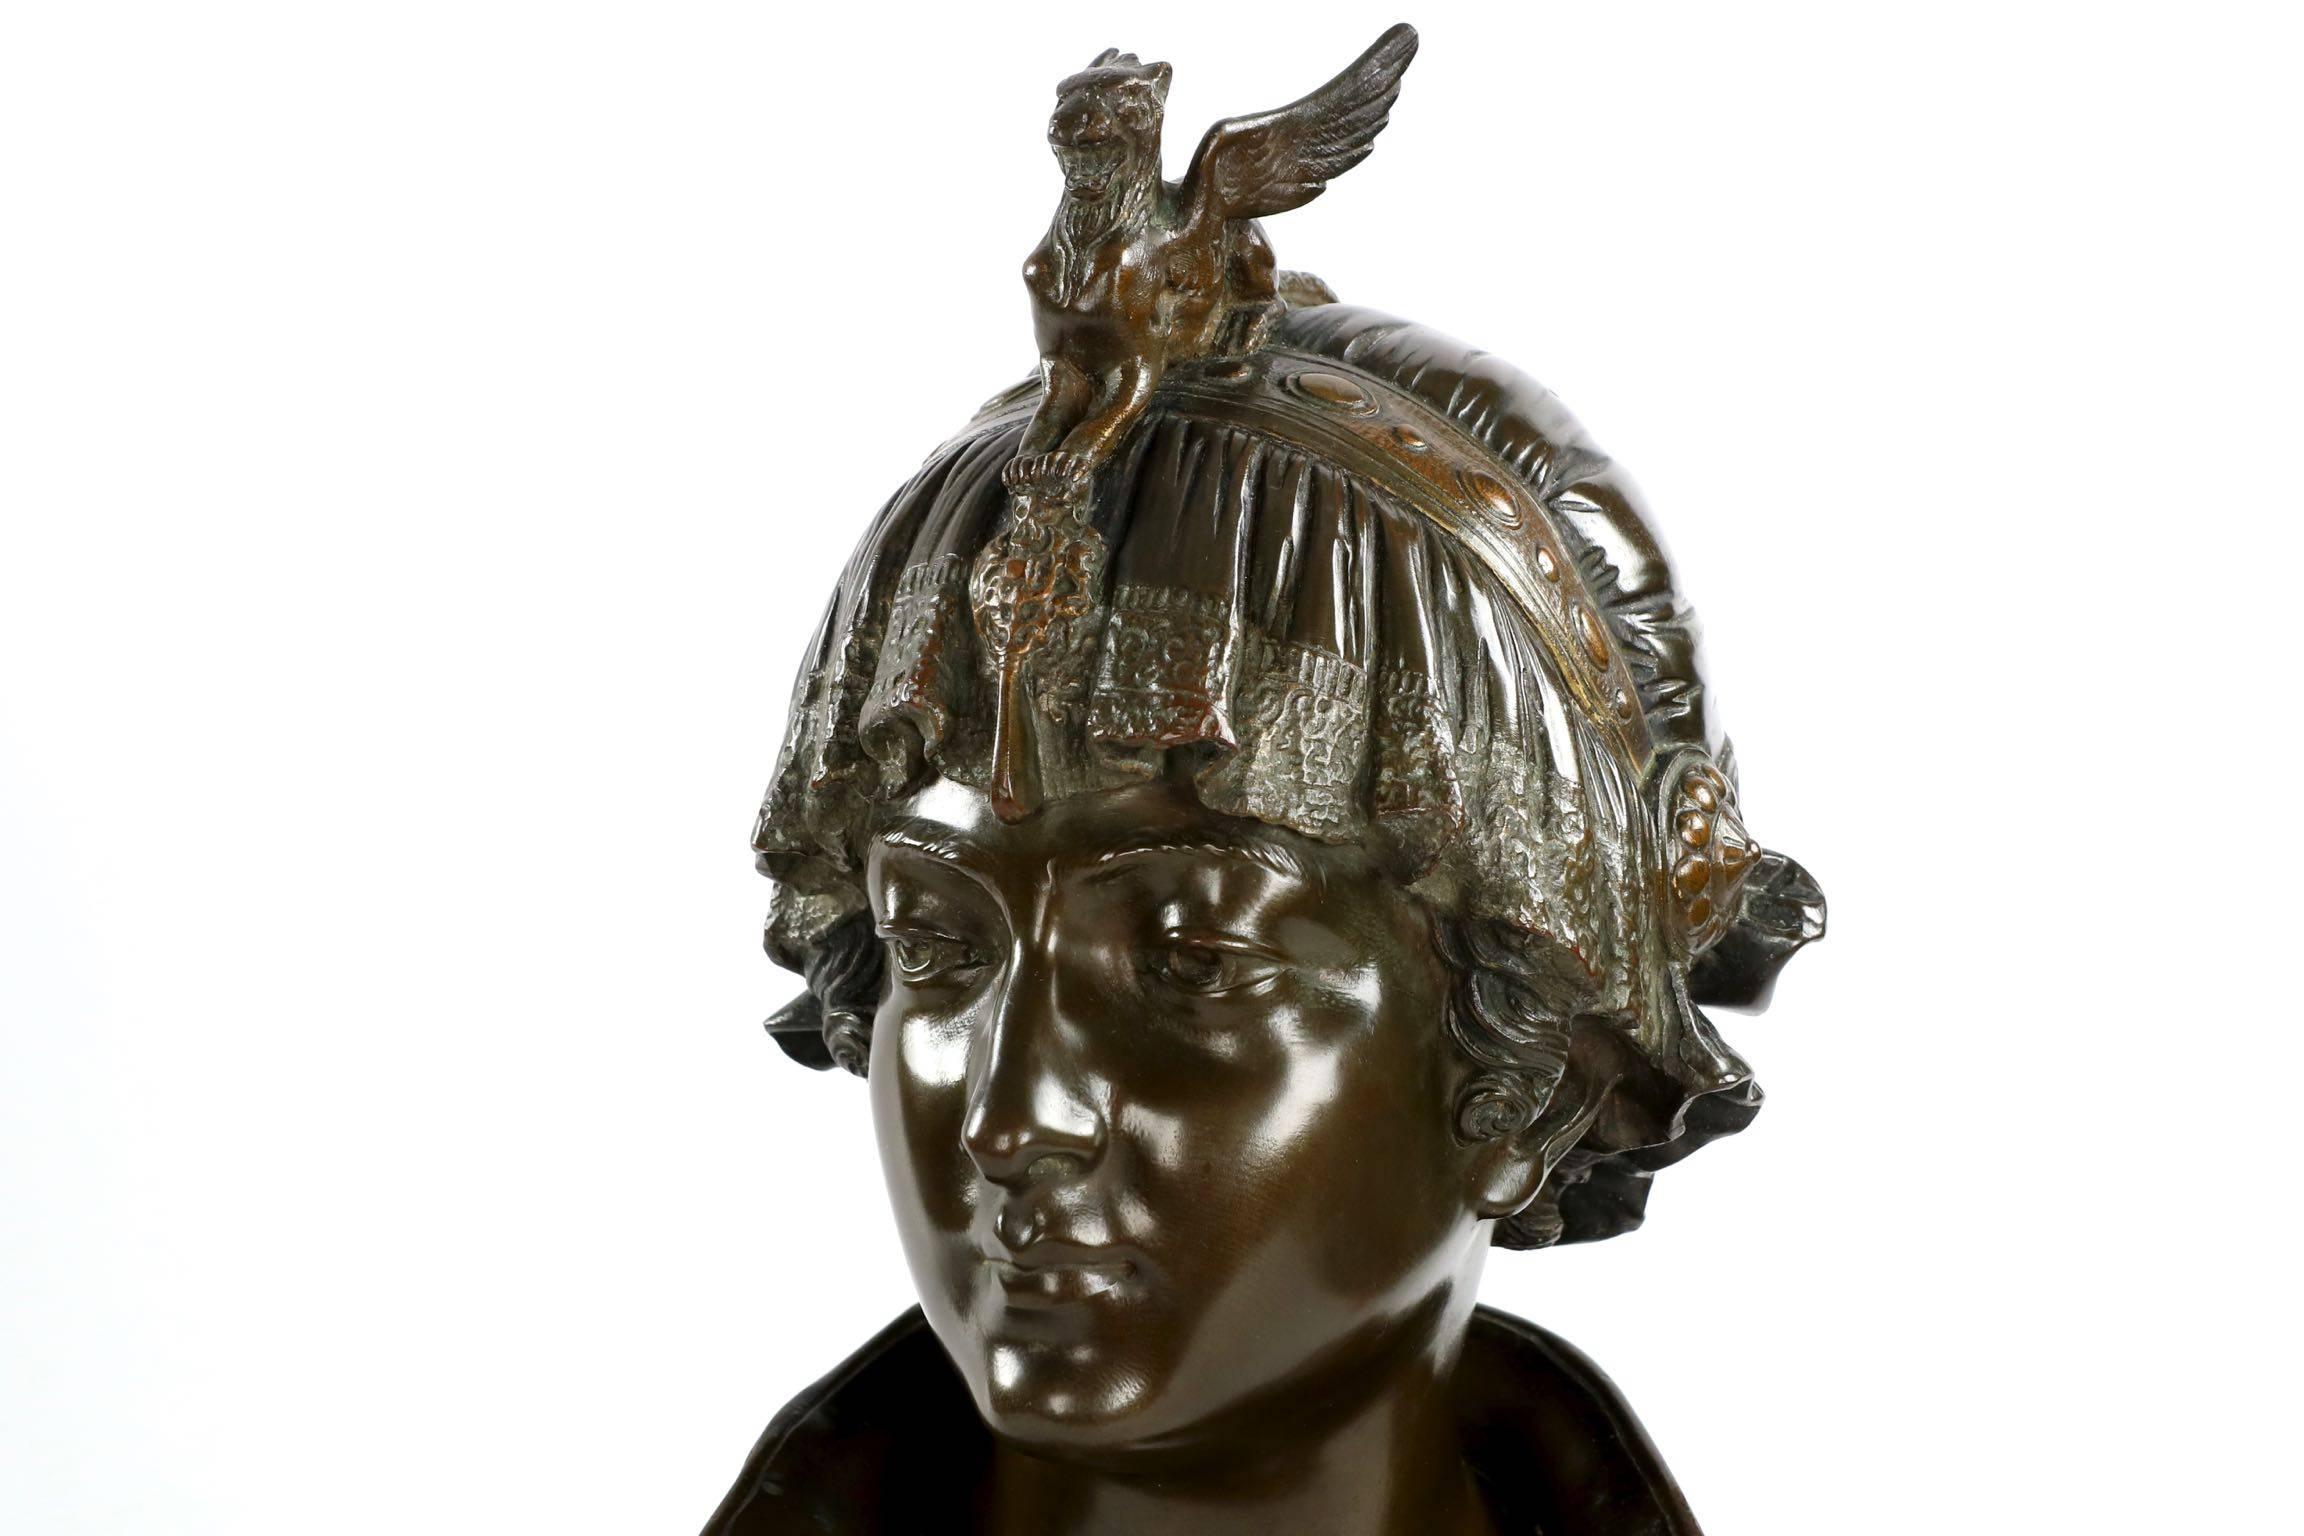 This exceptionally well cast bust is a most refined presentation with its red-oxide and deep brown experty cold-painted surfaces over crisp and inordinately finely chiselled bronze. The figure, identified as “Bianca" on the placard along the